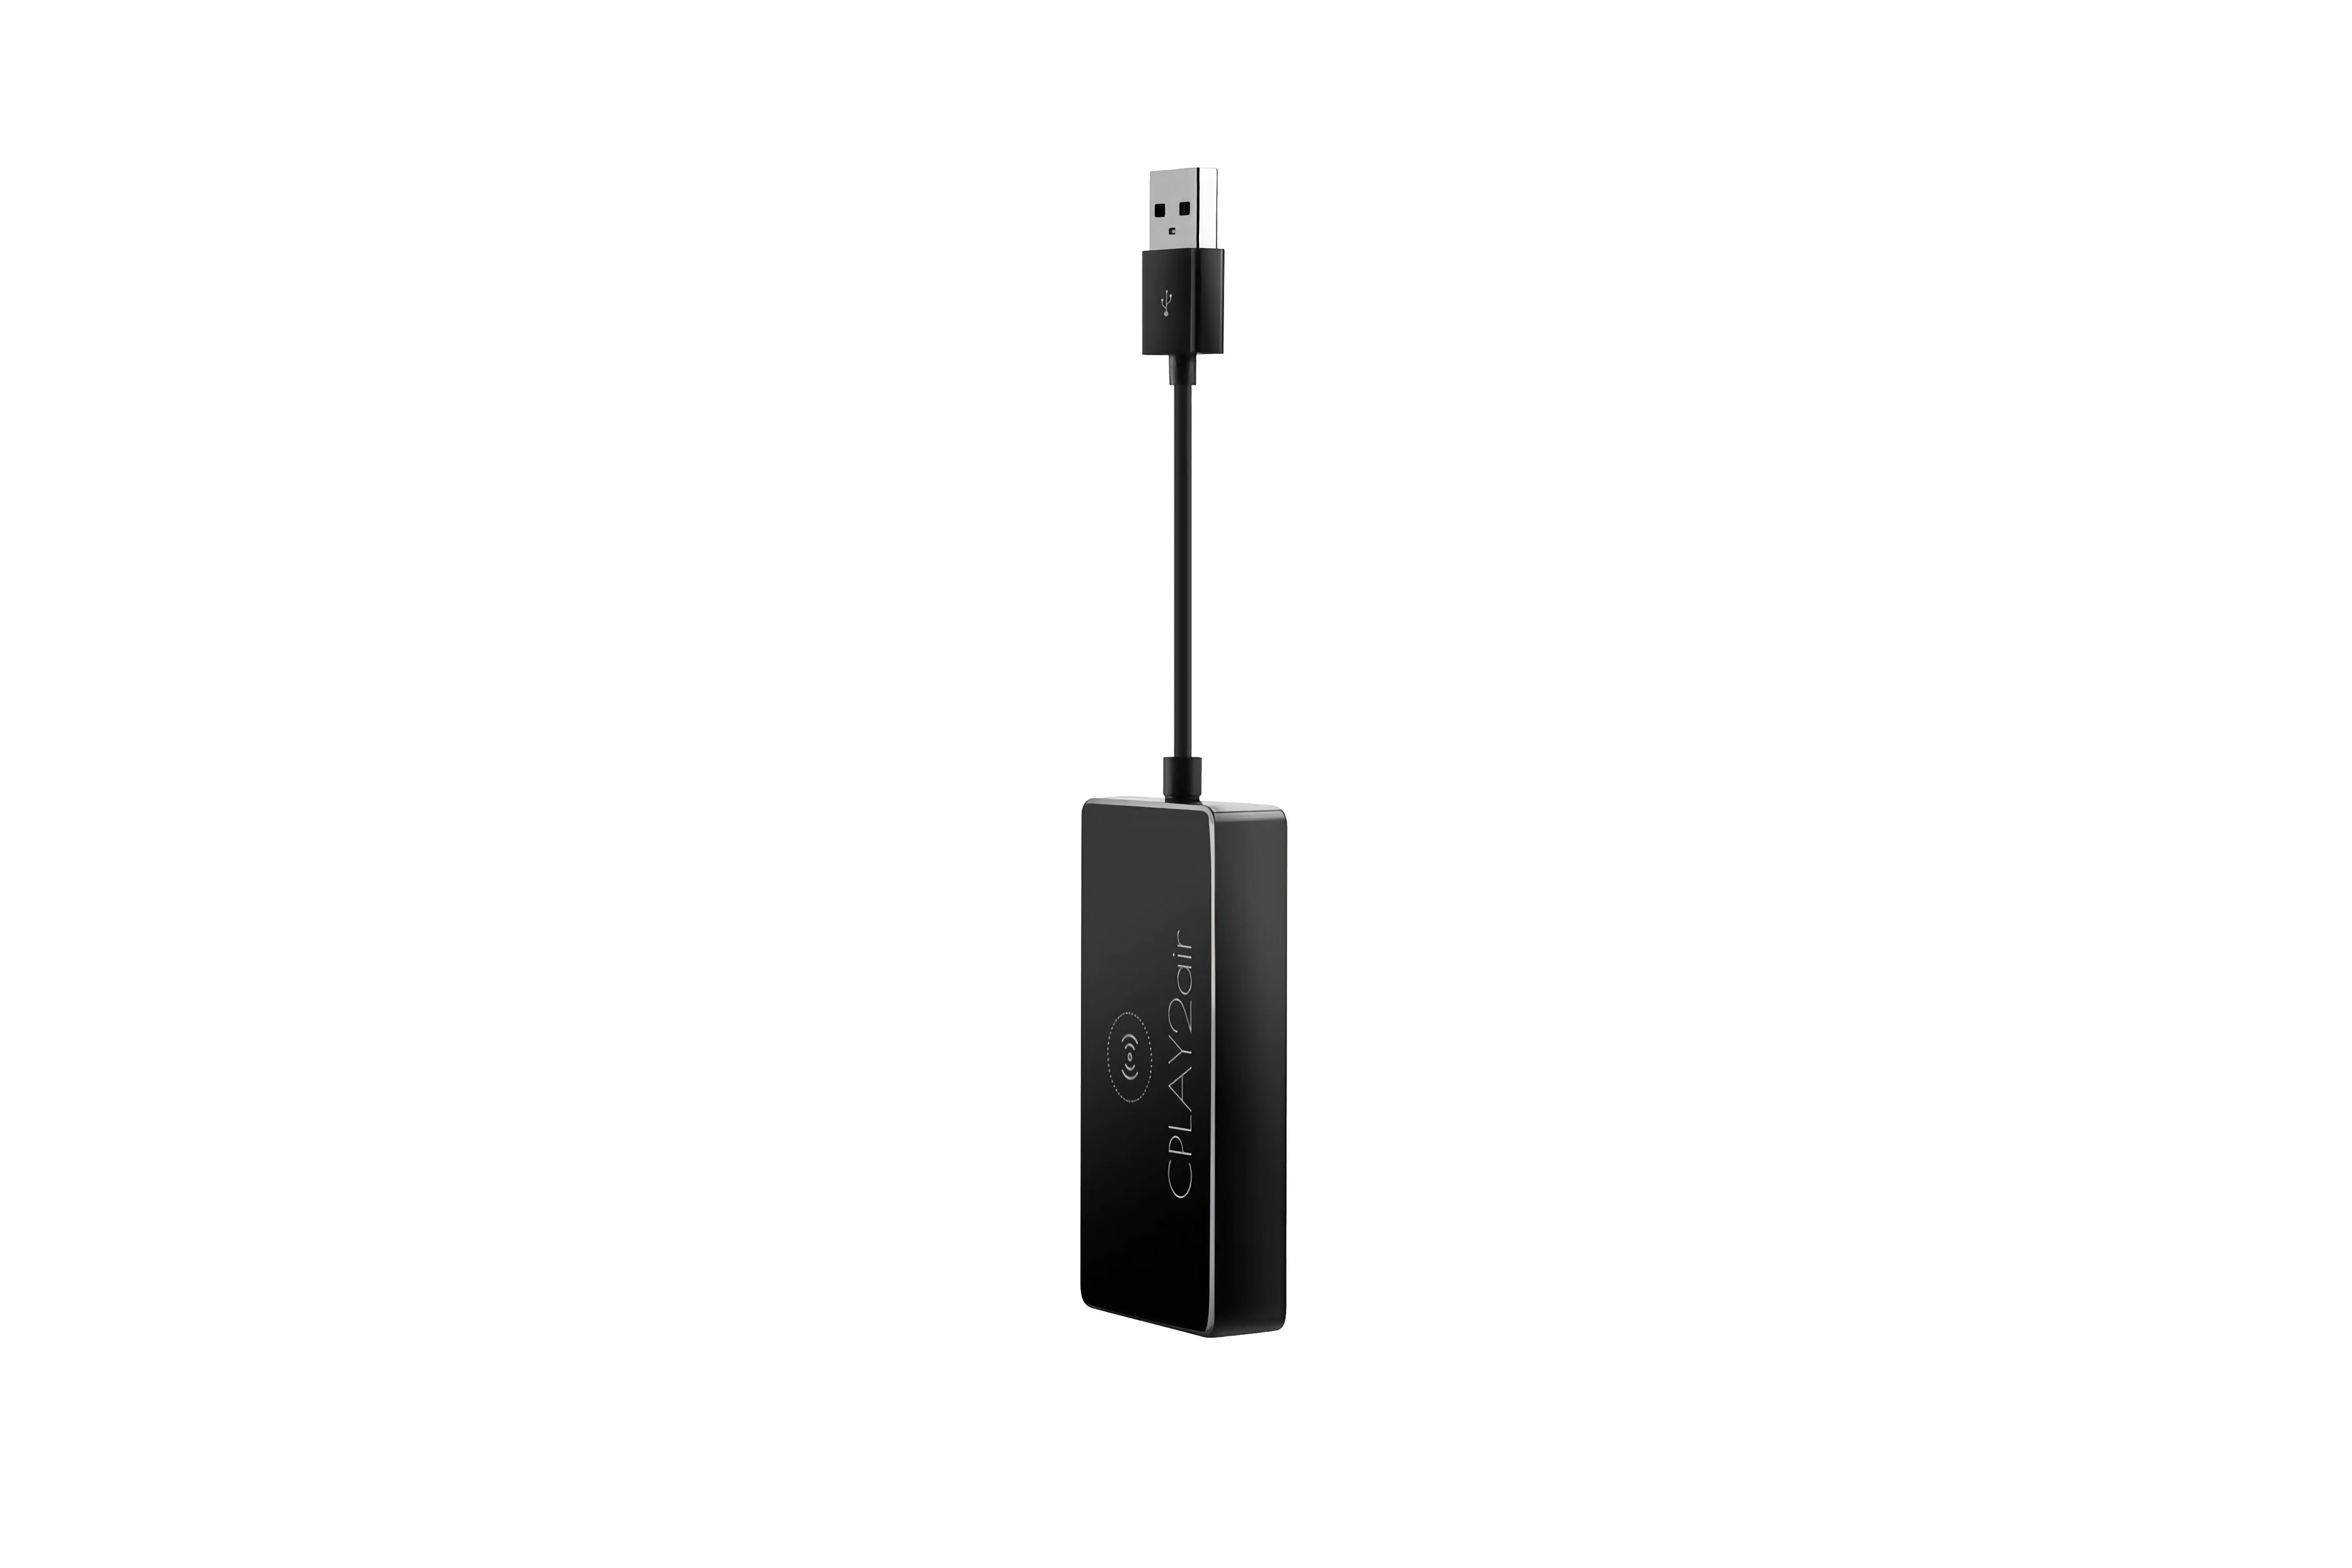 A black plastic rectangle with a USB-A cable sticking out of the top.